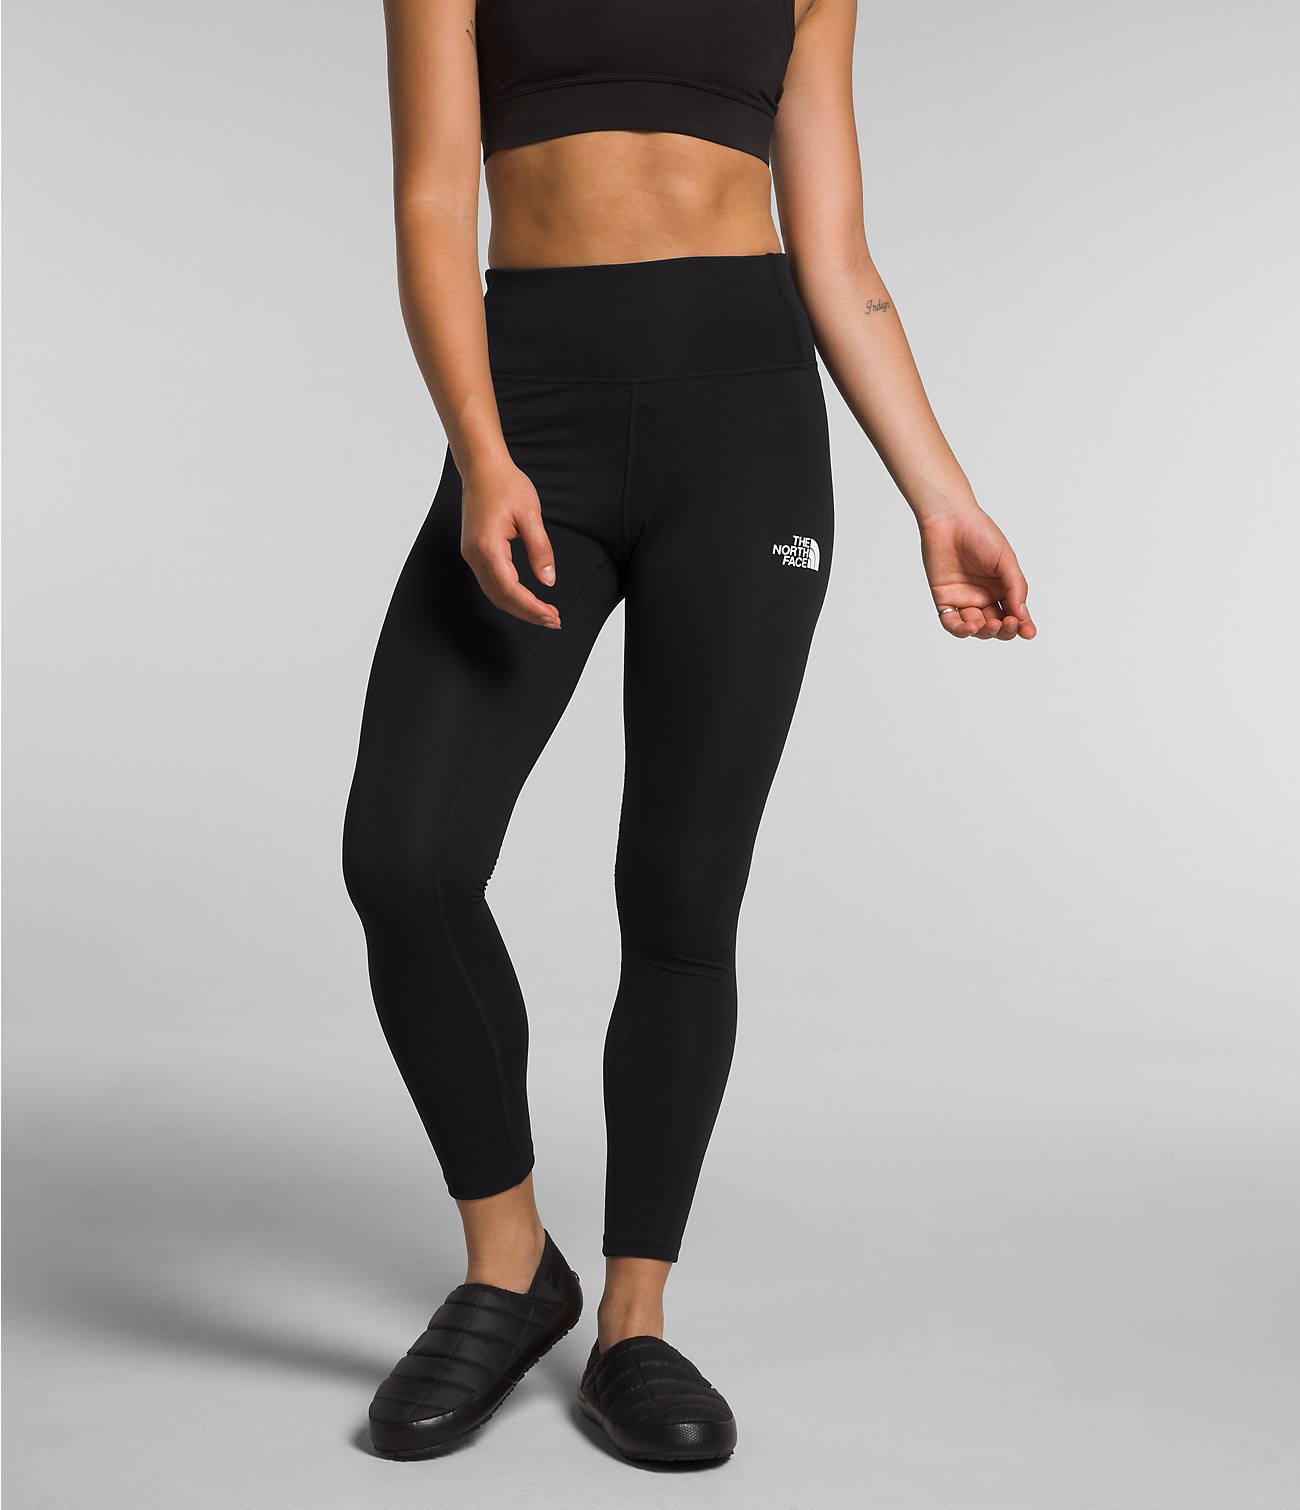 Women’s FD Pro 160 Tights | The North Face